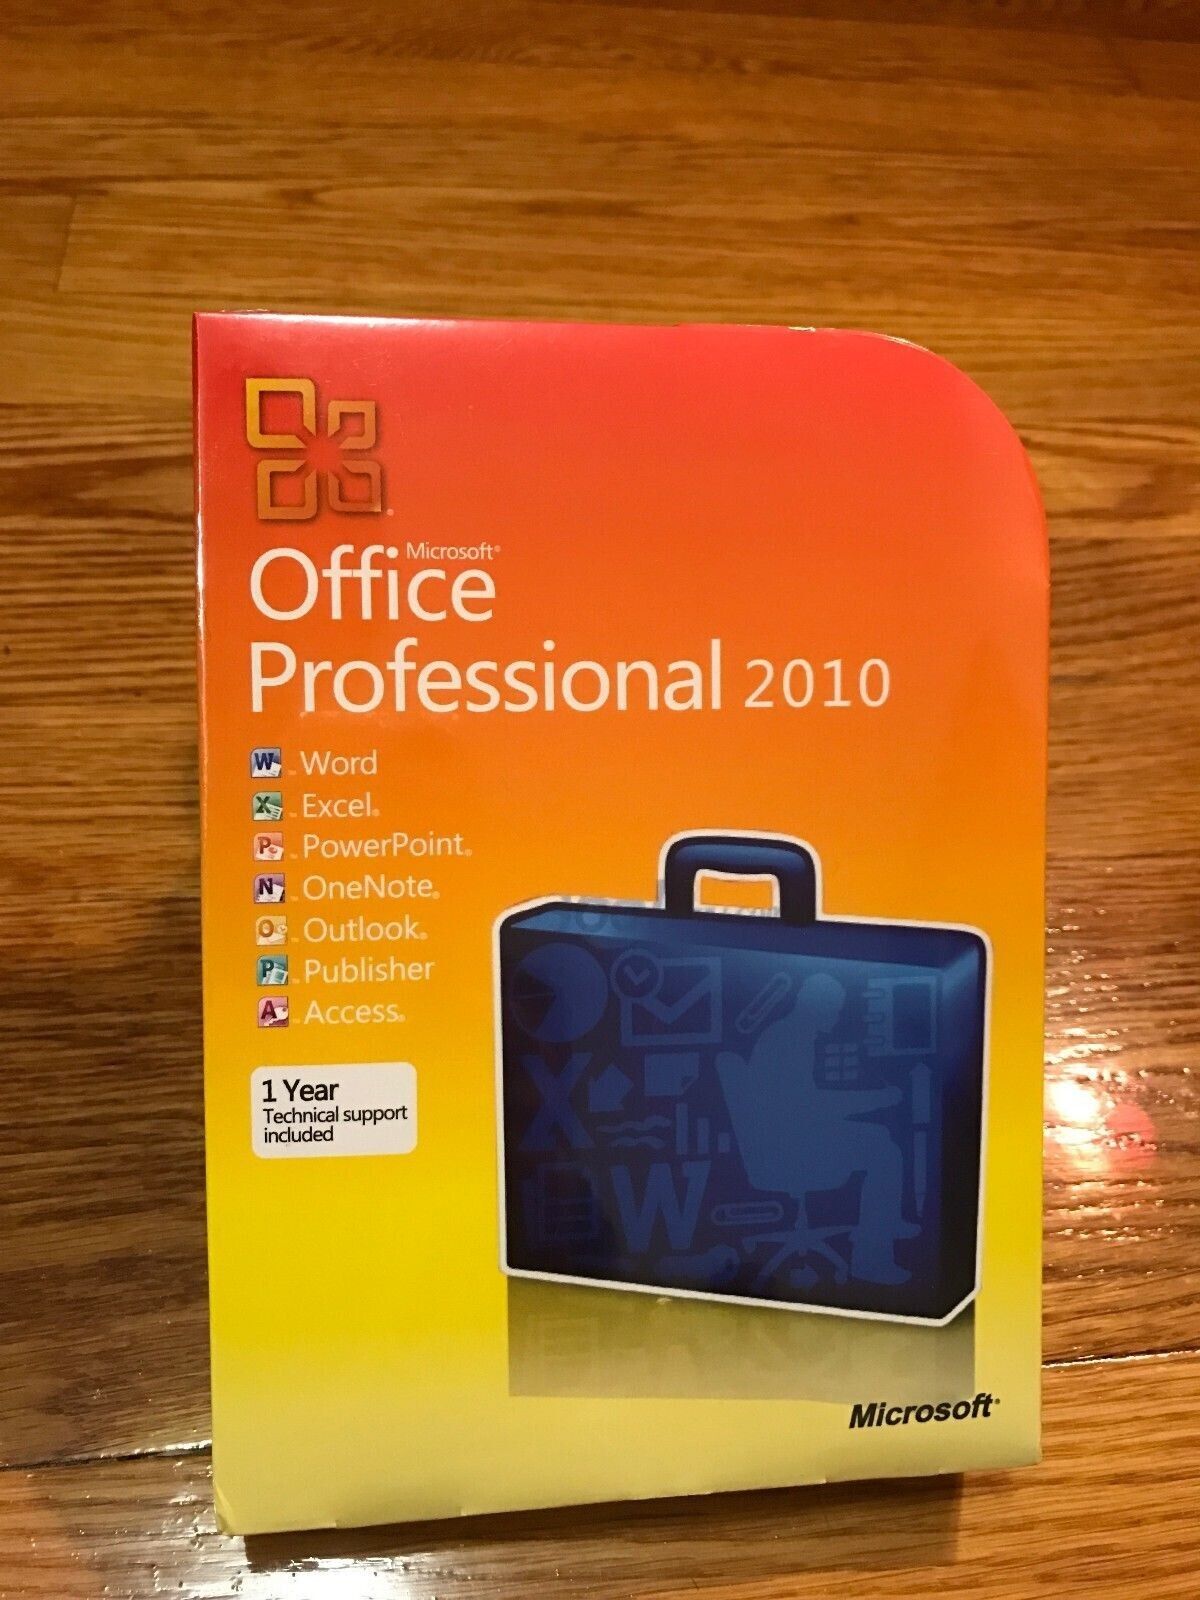 Microsoft Office 2010 Professional For 3 PCs Full Retail NEW SEALED Box Version